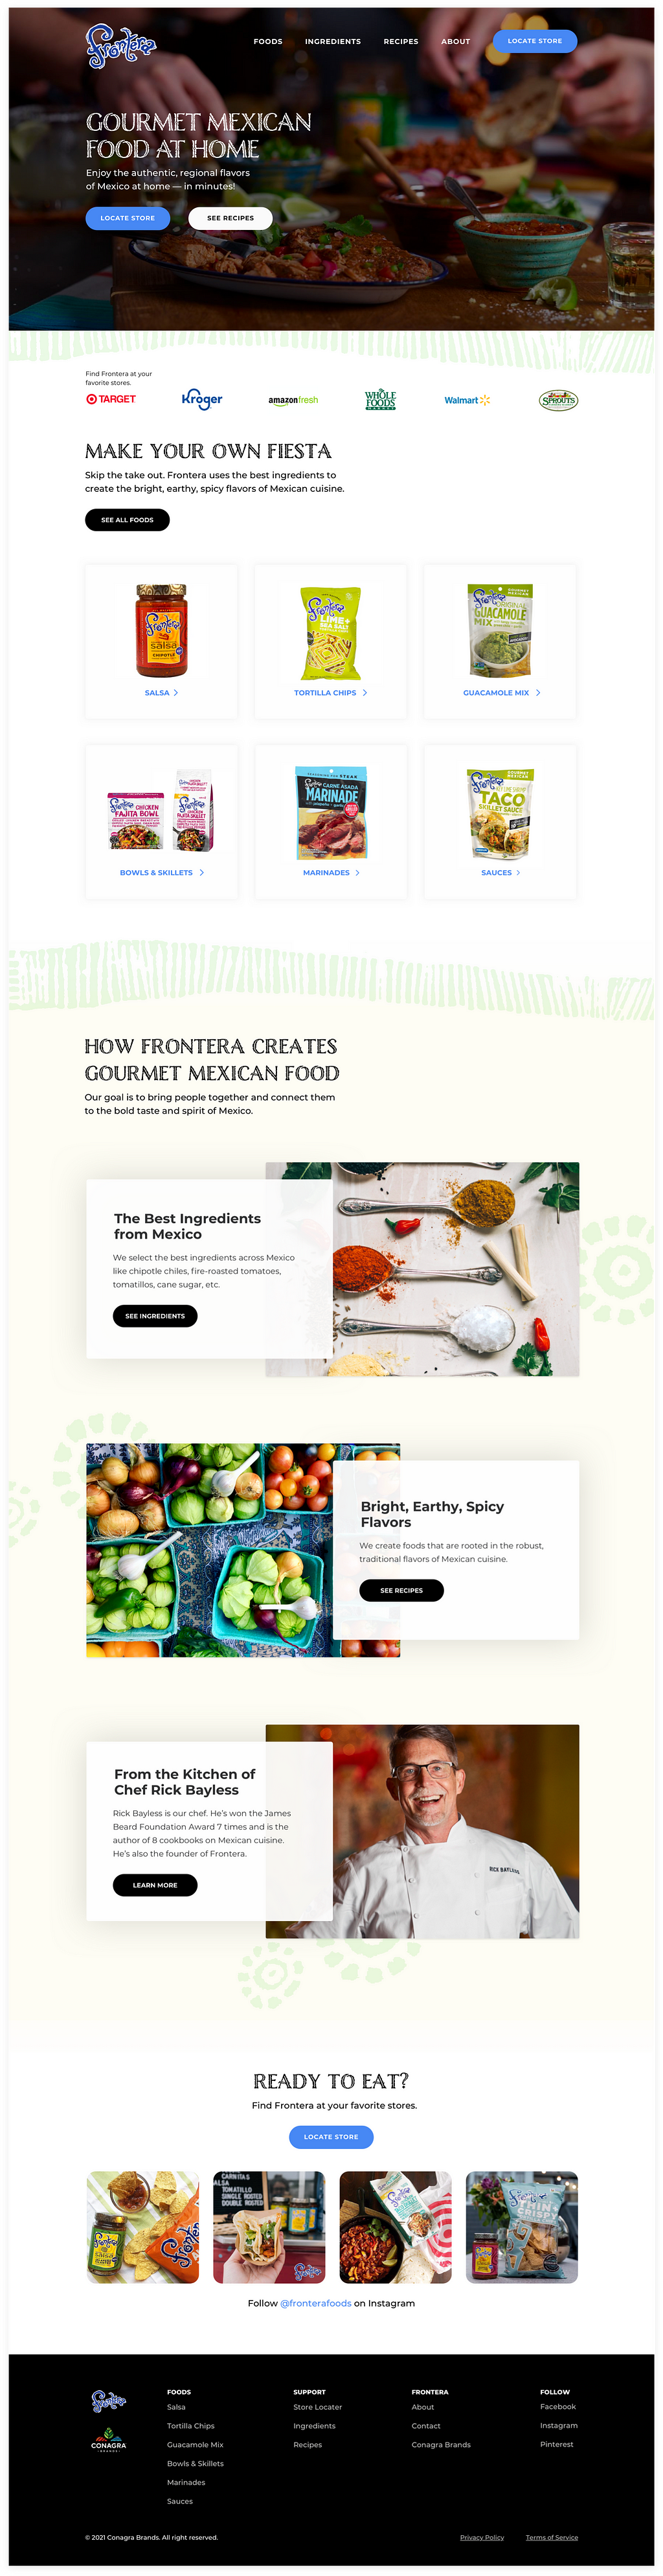 High-fidelity redesign of Frontera’s website.